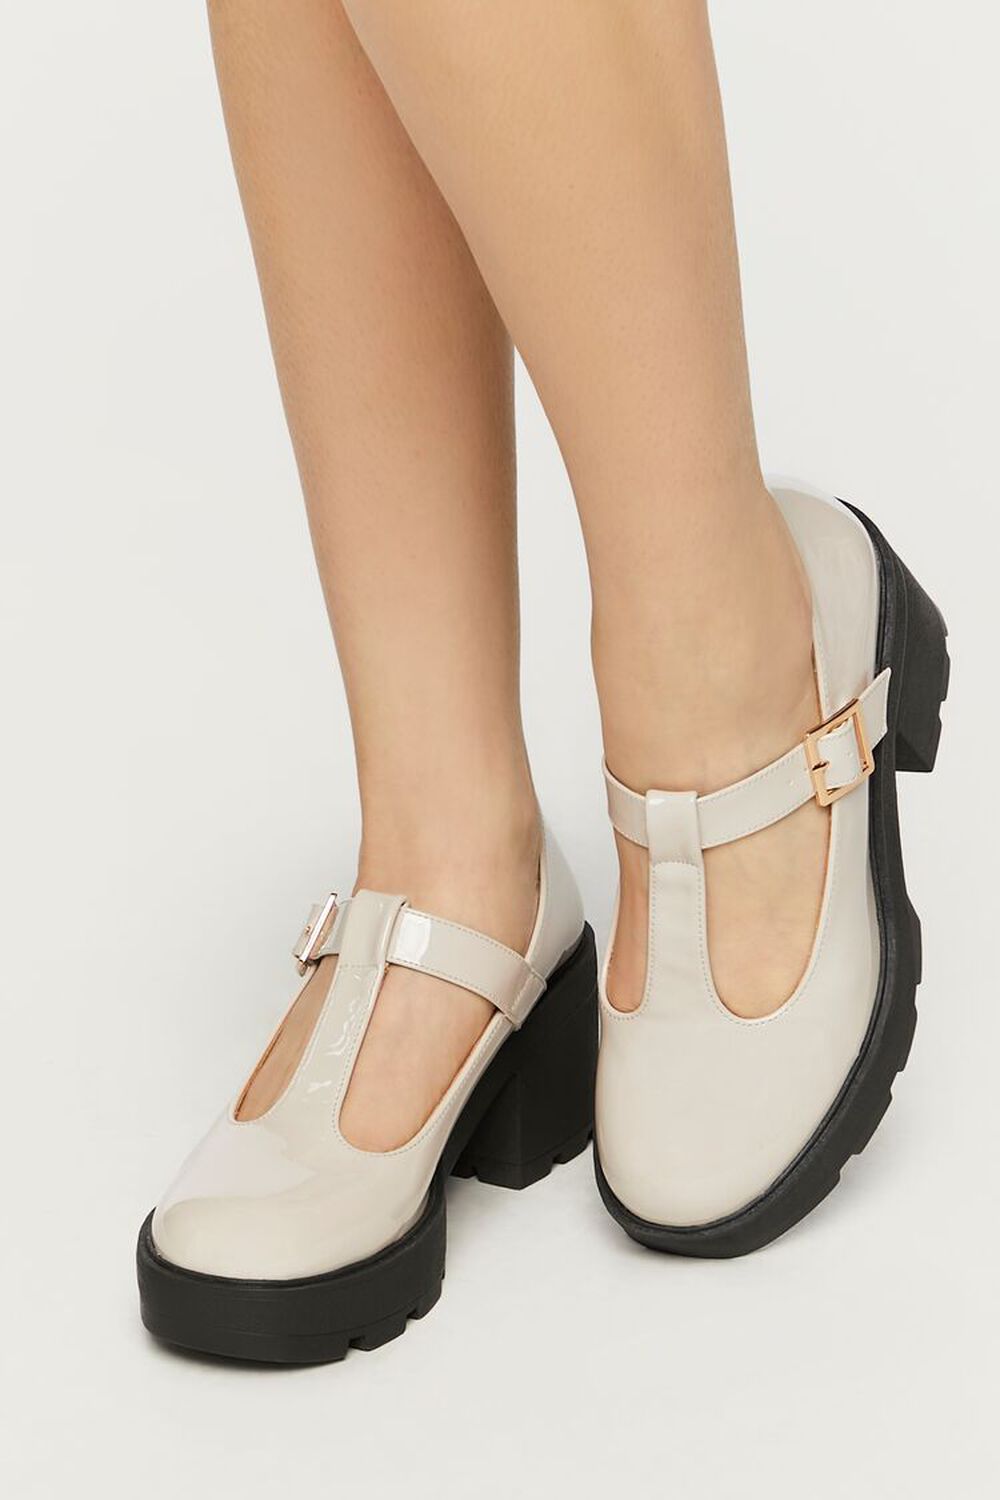 CREAM Faux Patent Leather T-Strap Mary Jane Heels, image 2